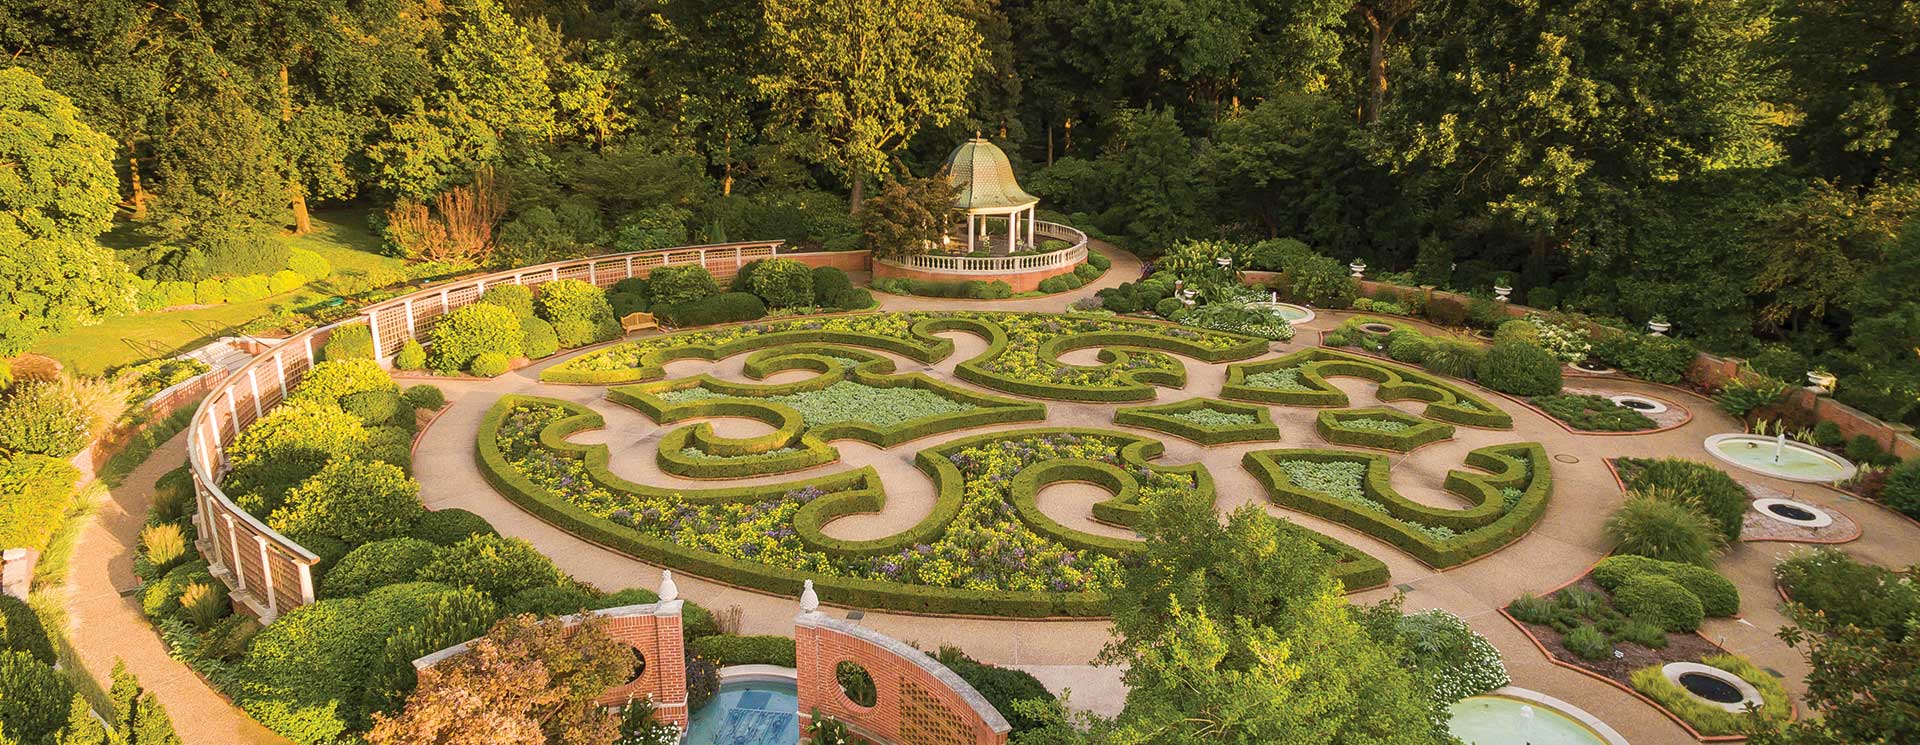 areal view of the garden labyrinth